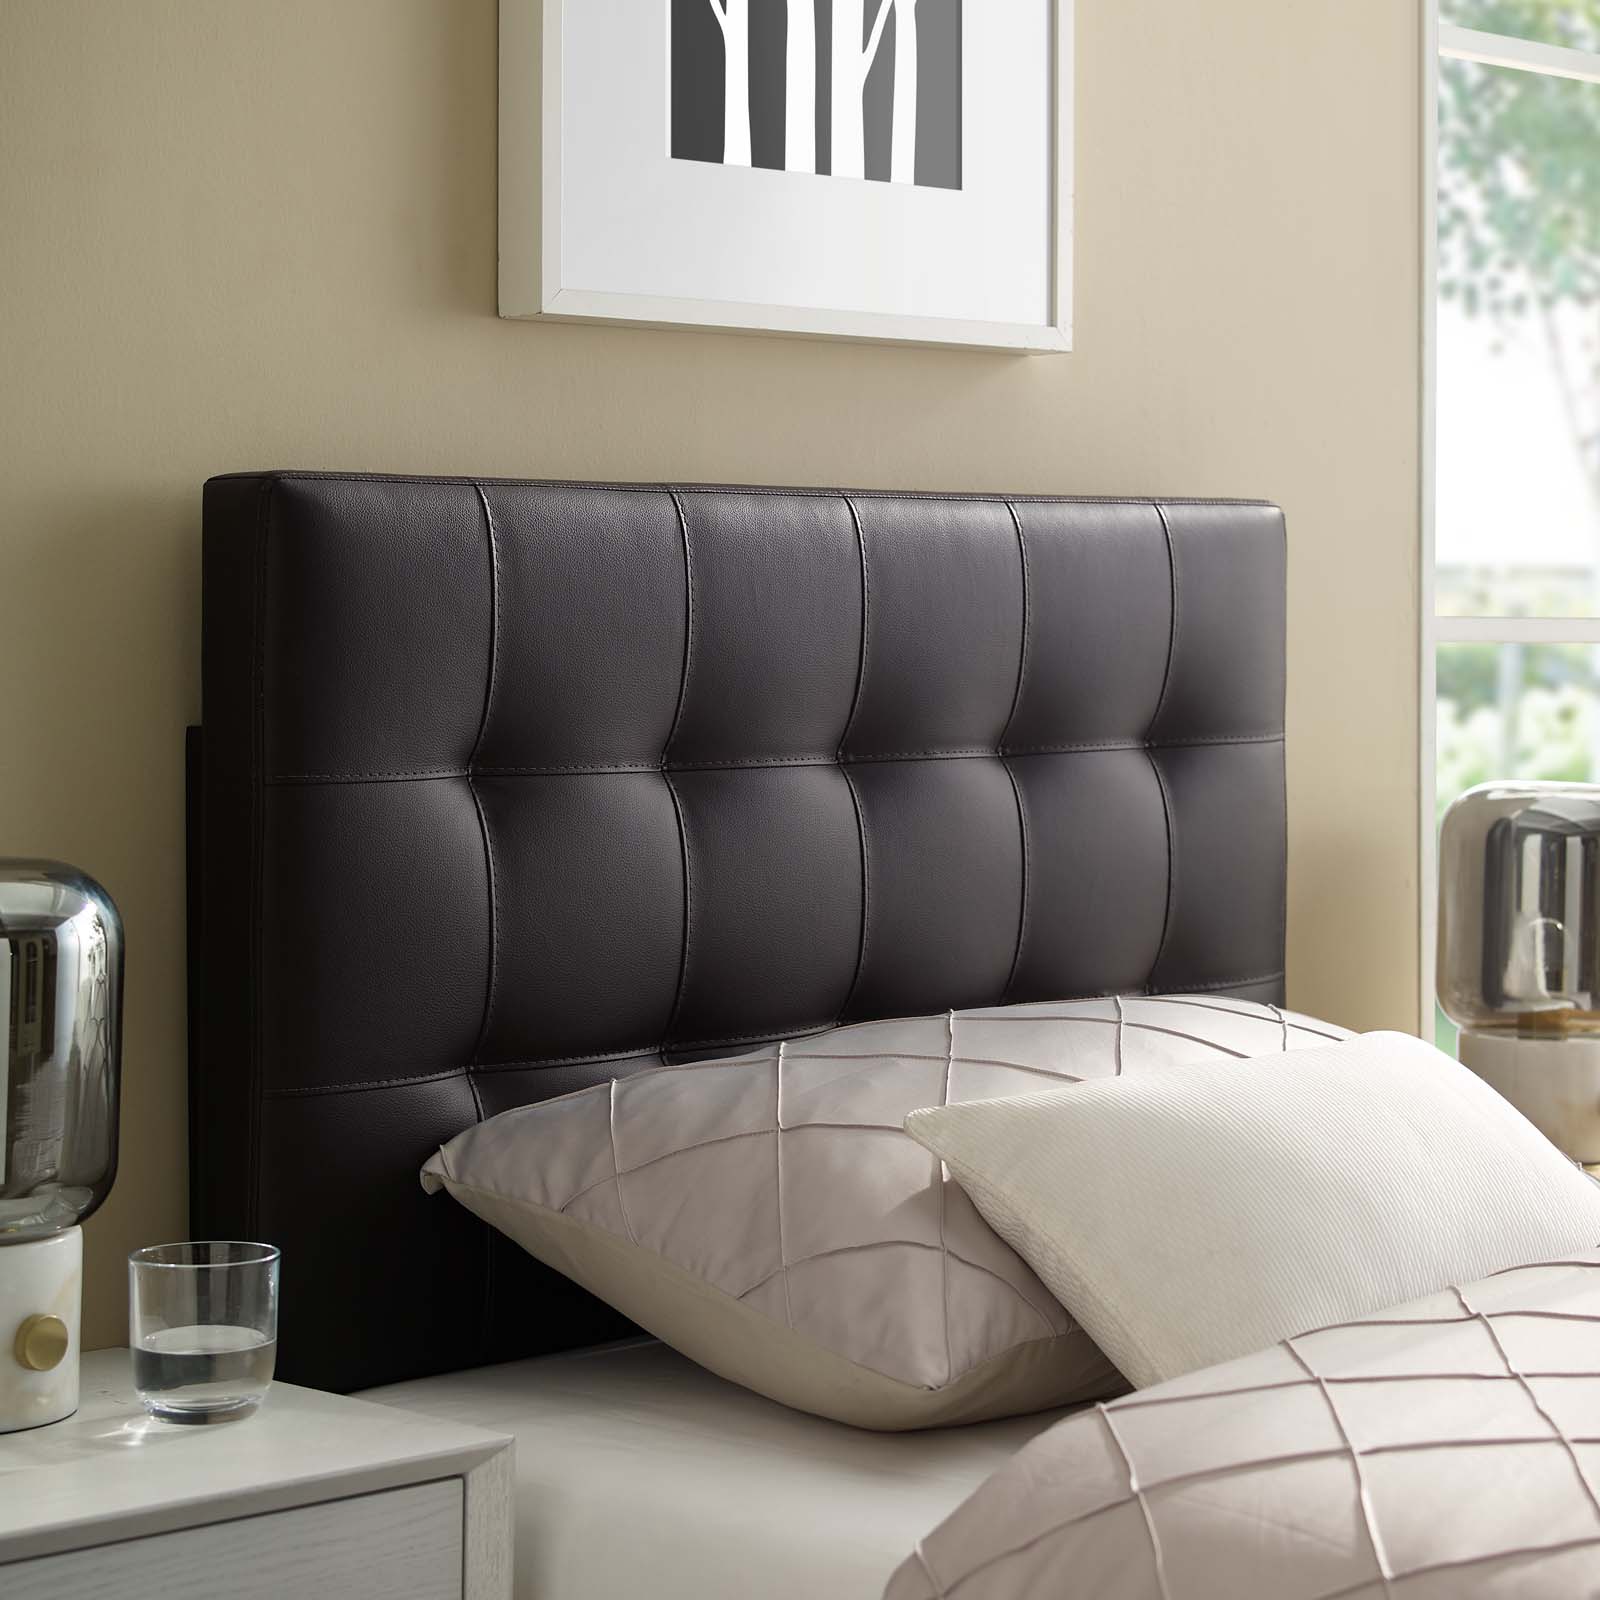 Modway Lily Twin Upholstered Vinyl Headboard in Brown - image 1 of 5